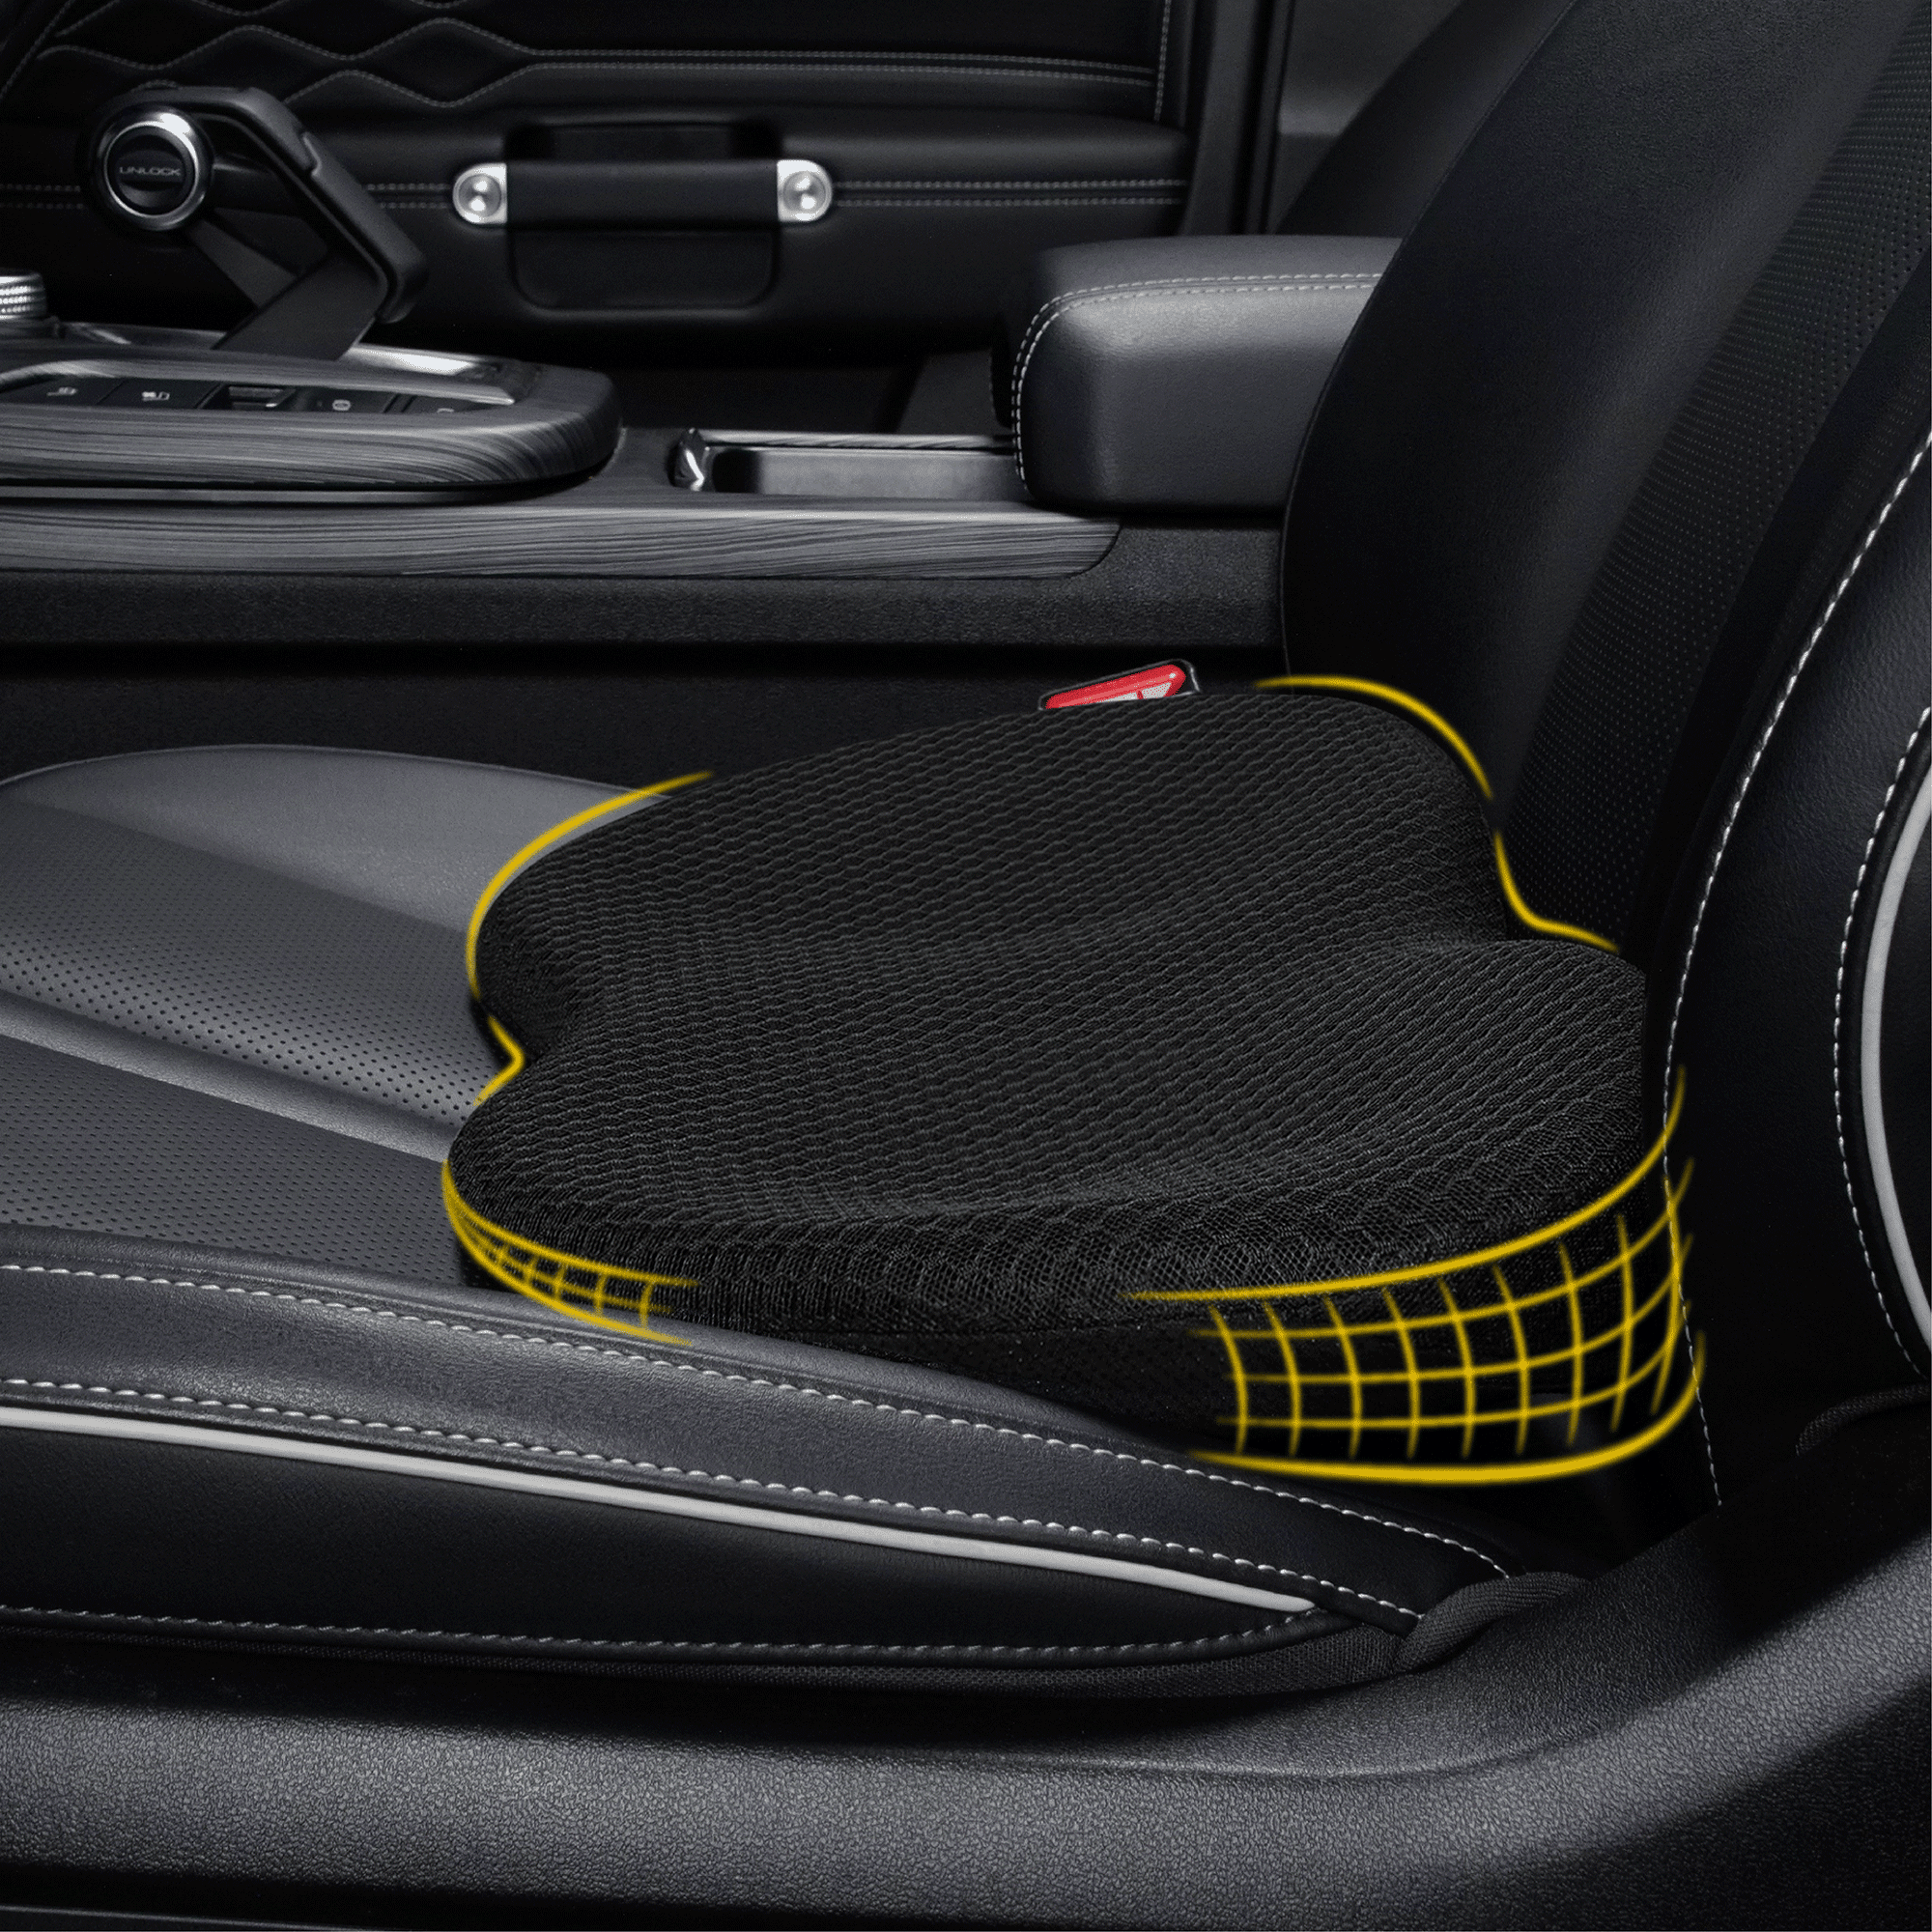 Wedge Car Seat Cushion: Memory Foam Truck Seat Cushion for Car Seat Driver  - Sciatica and Back Pain Relief - Enhancing Driving Comfort 